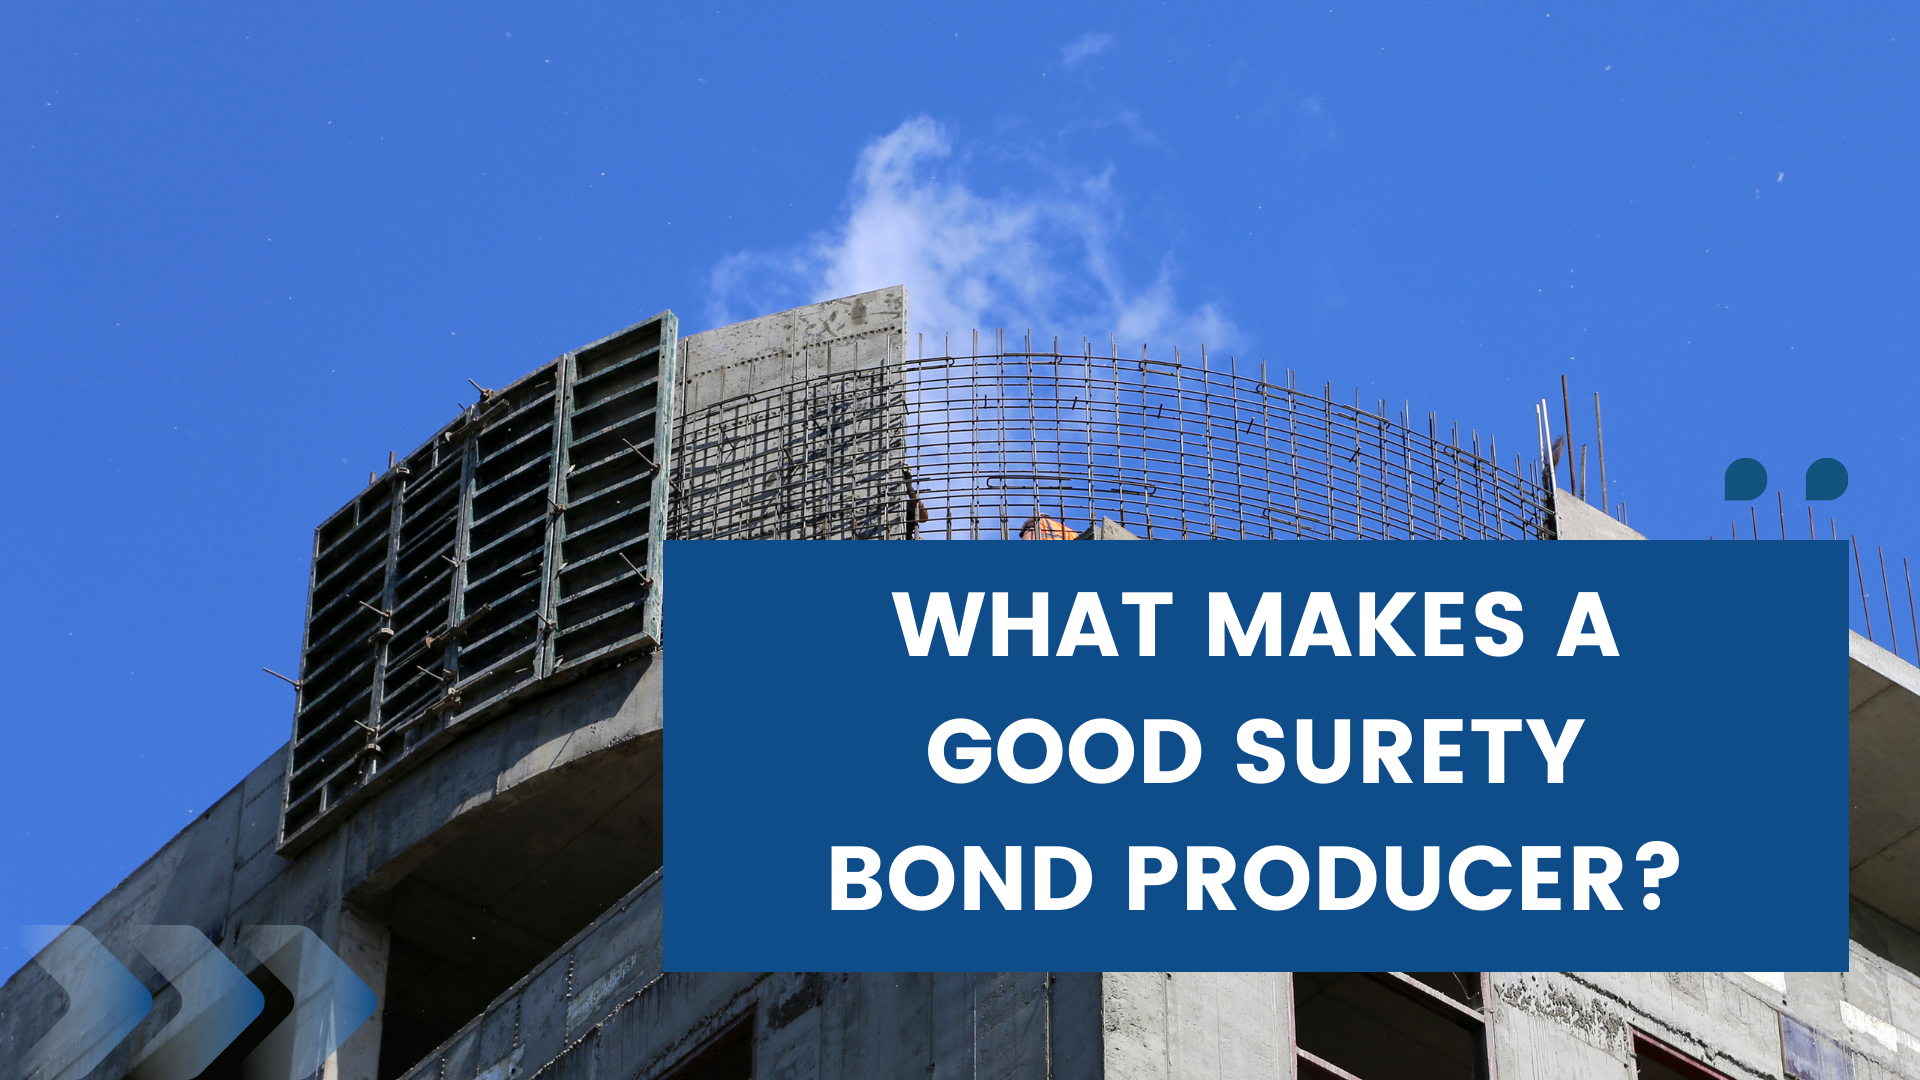 surety bond - What qualities do you look for in a surety bond producer - building construction